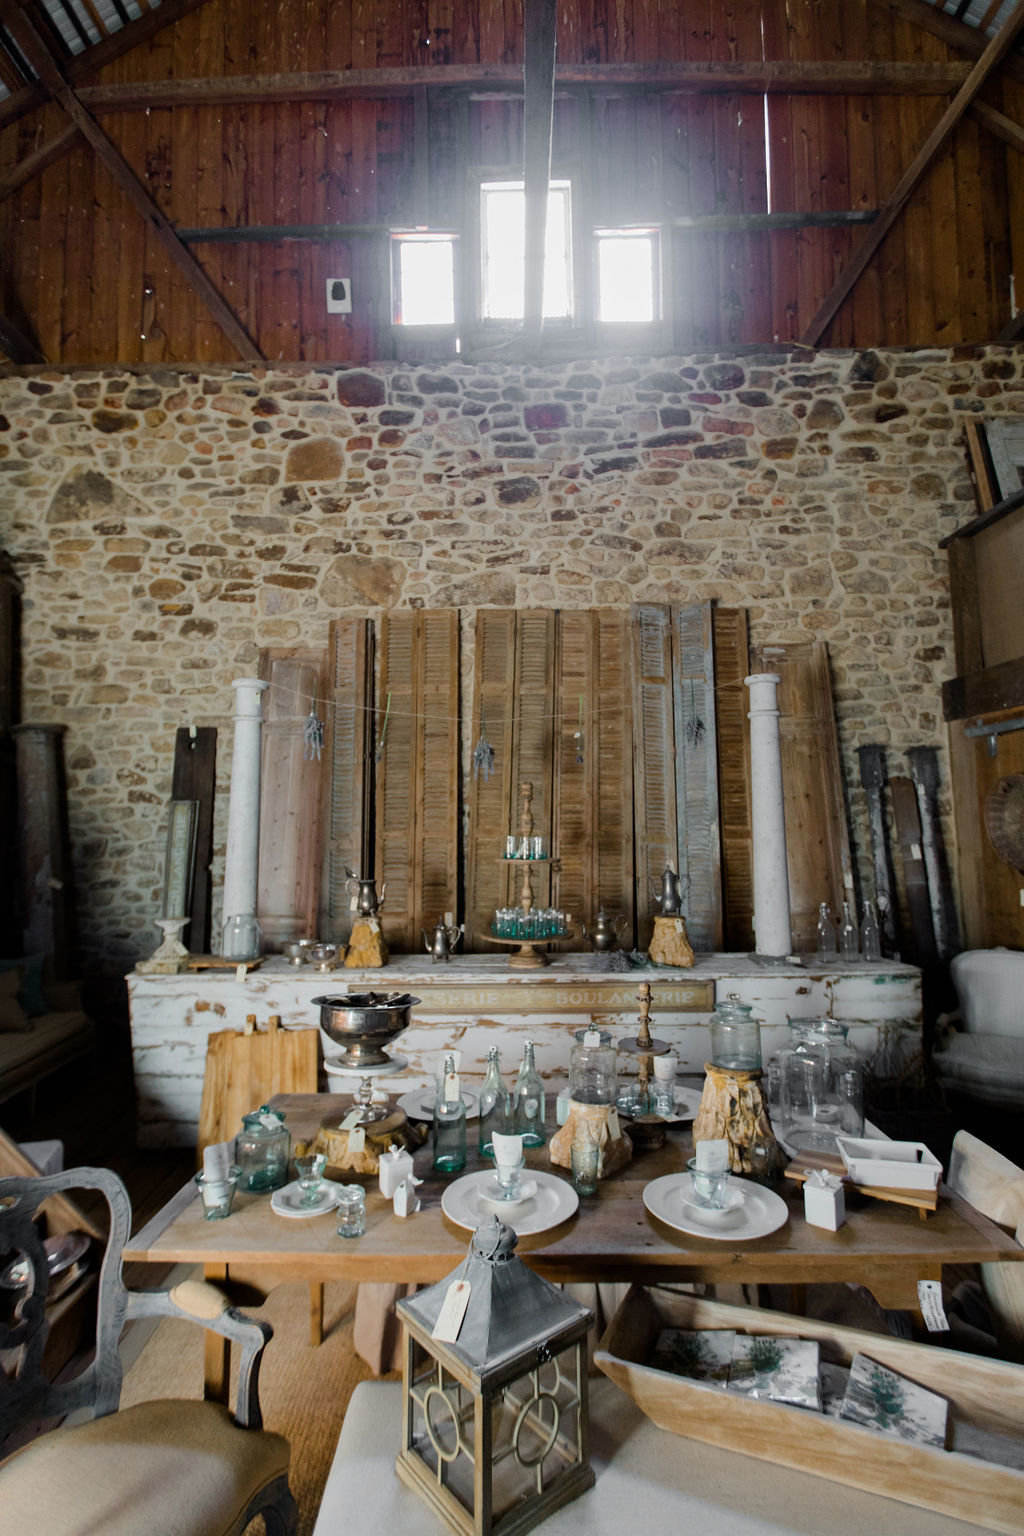 Willowbrook Farm Barn Sales - Celebrating the Beauty of ...